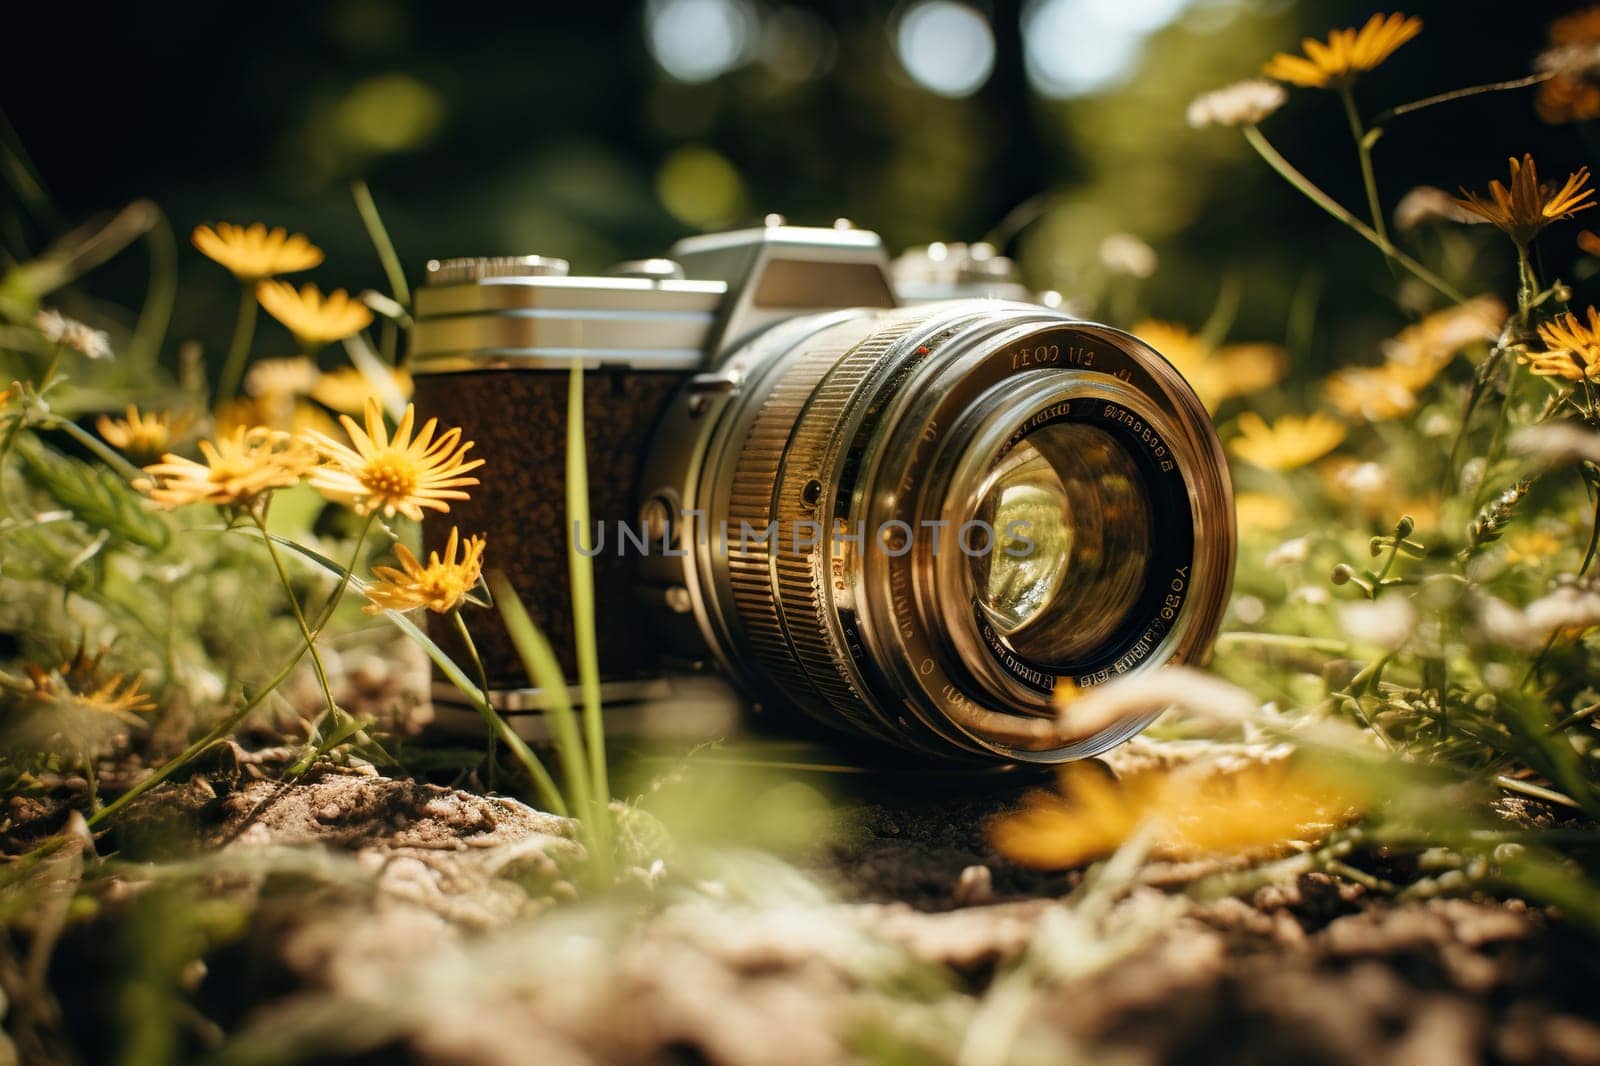 Vintage camera in a field with flowers.